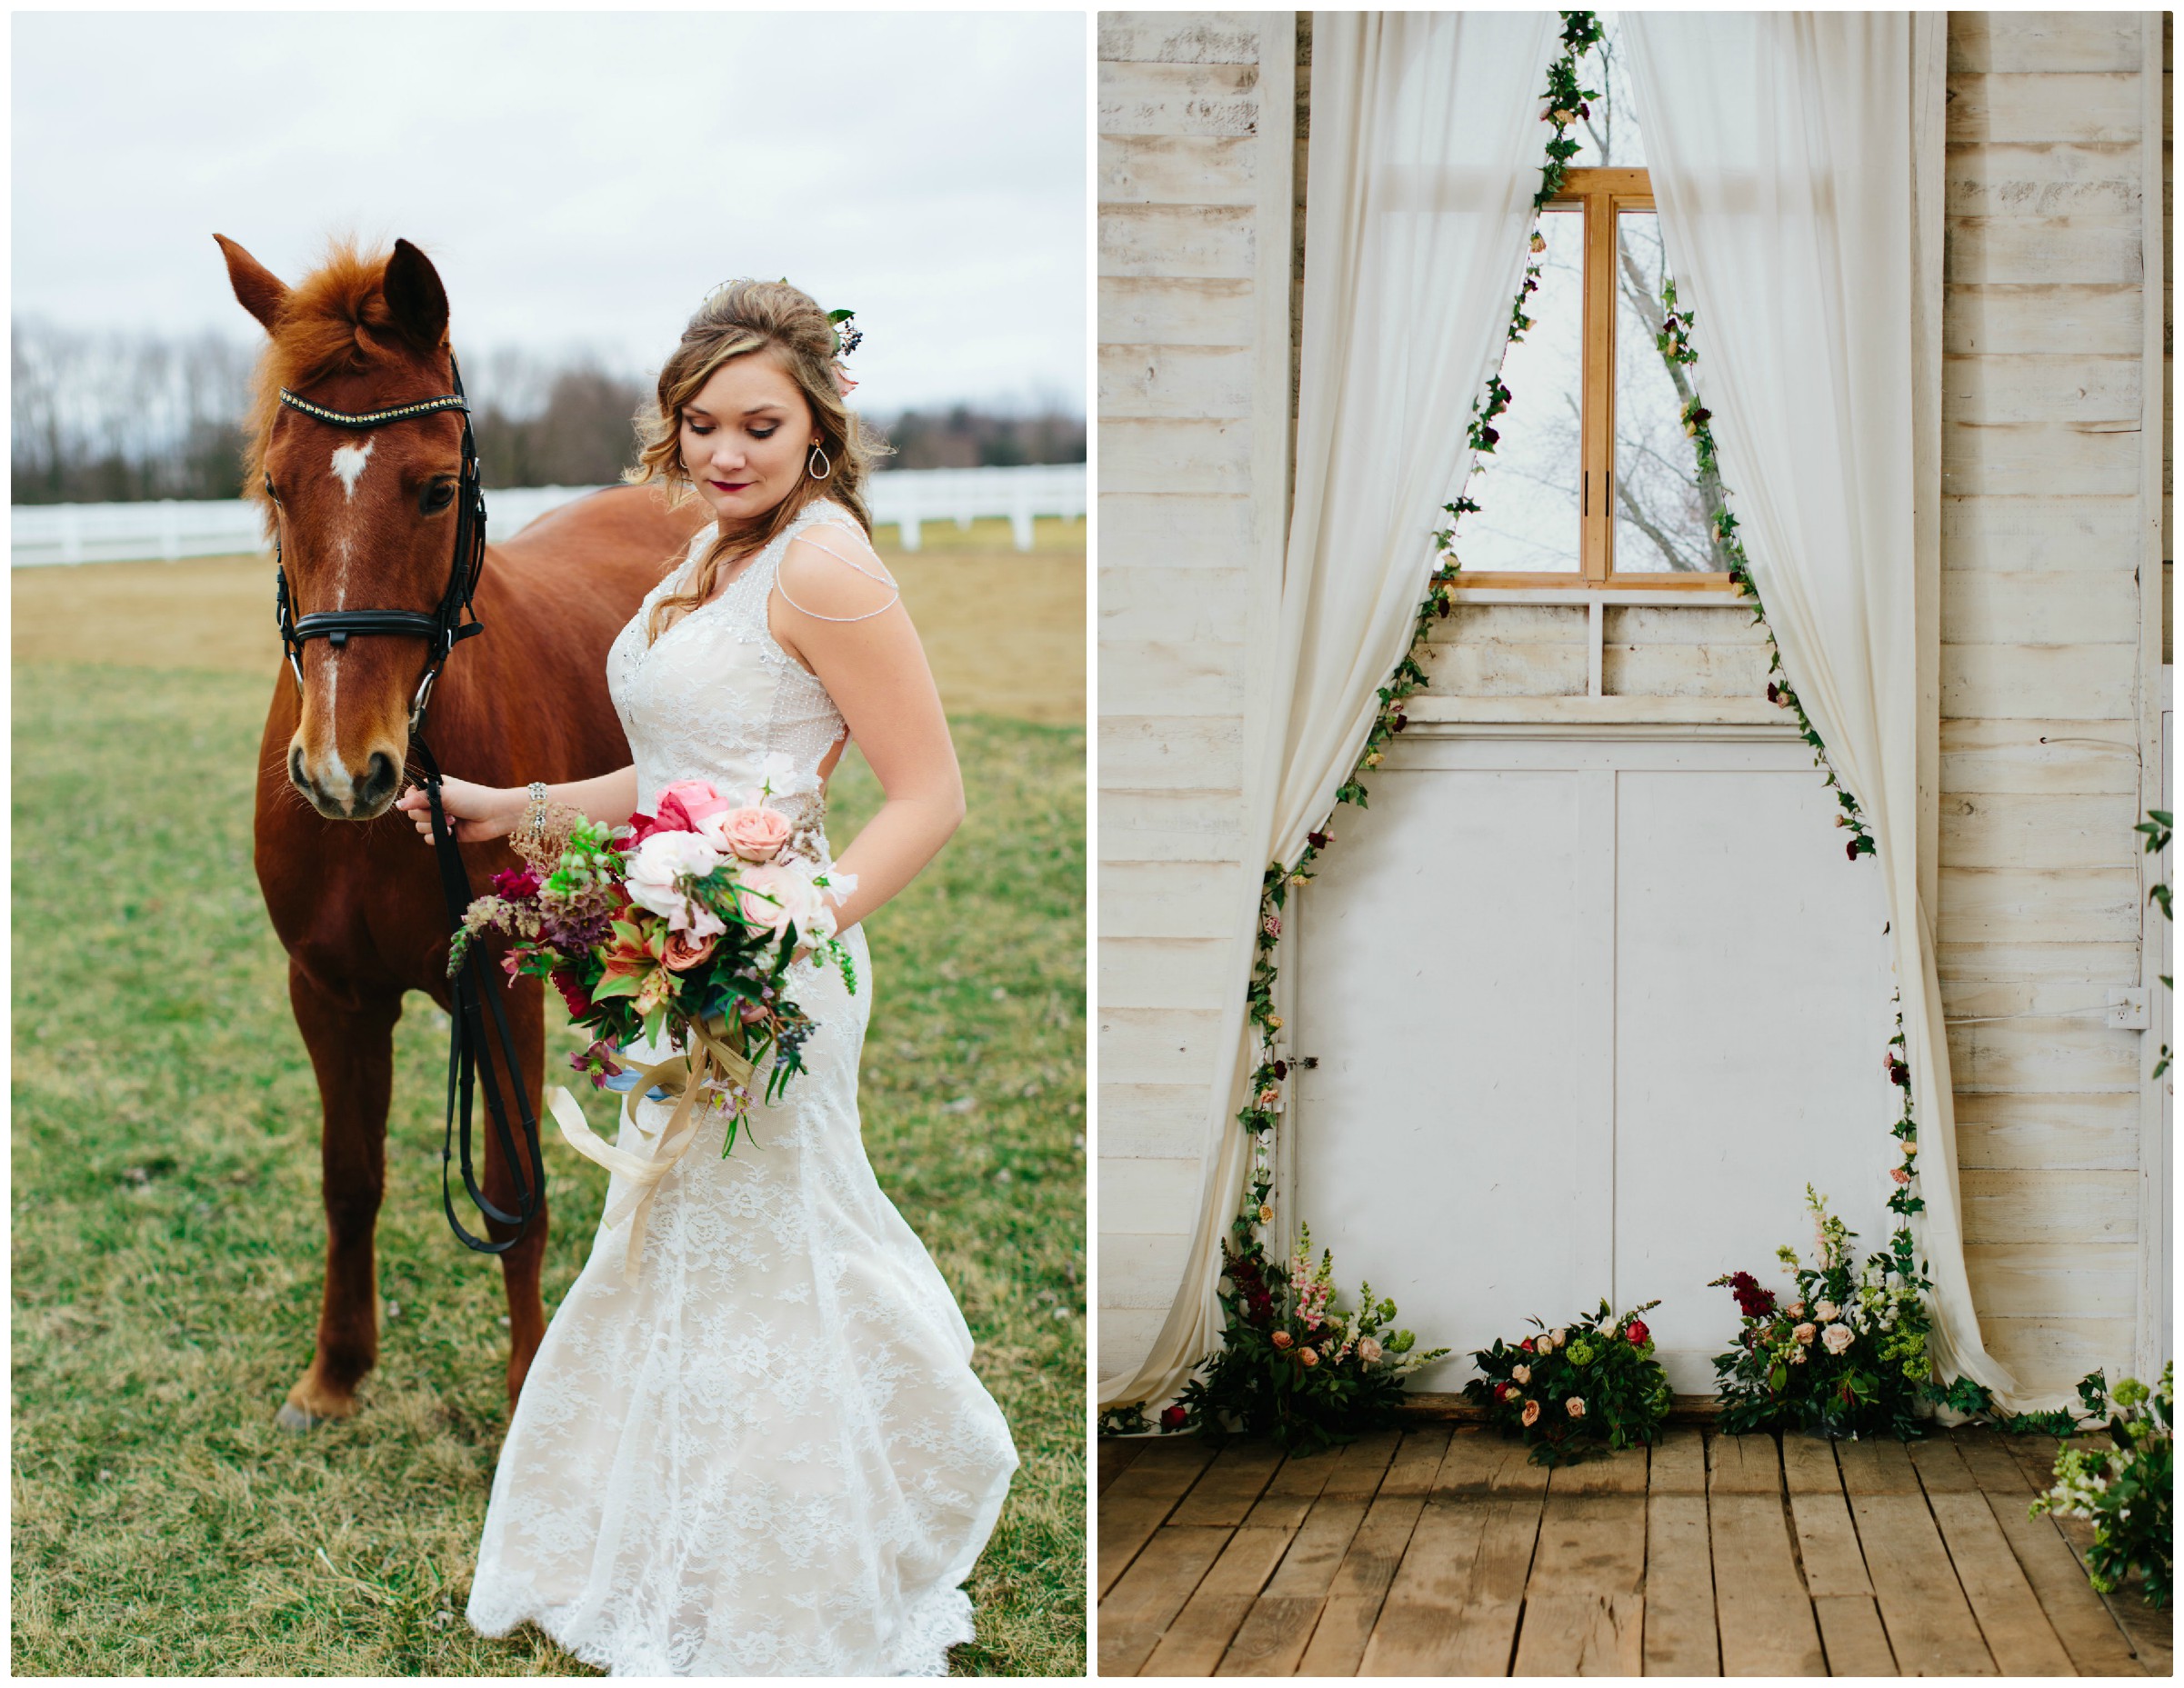 Rustic Wedding Ideas | The Day's Design | Katie Grace Photography